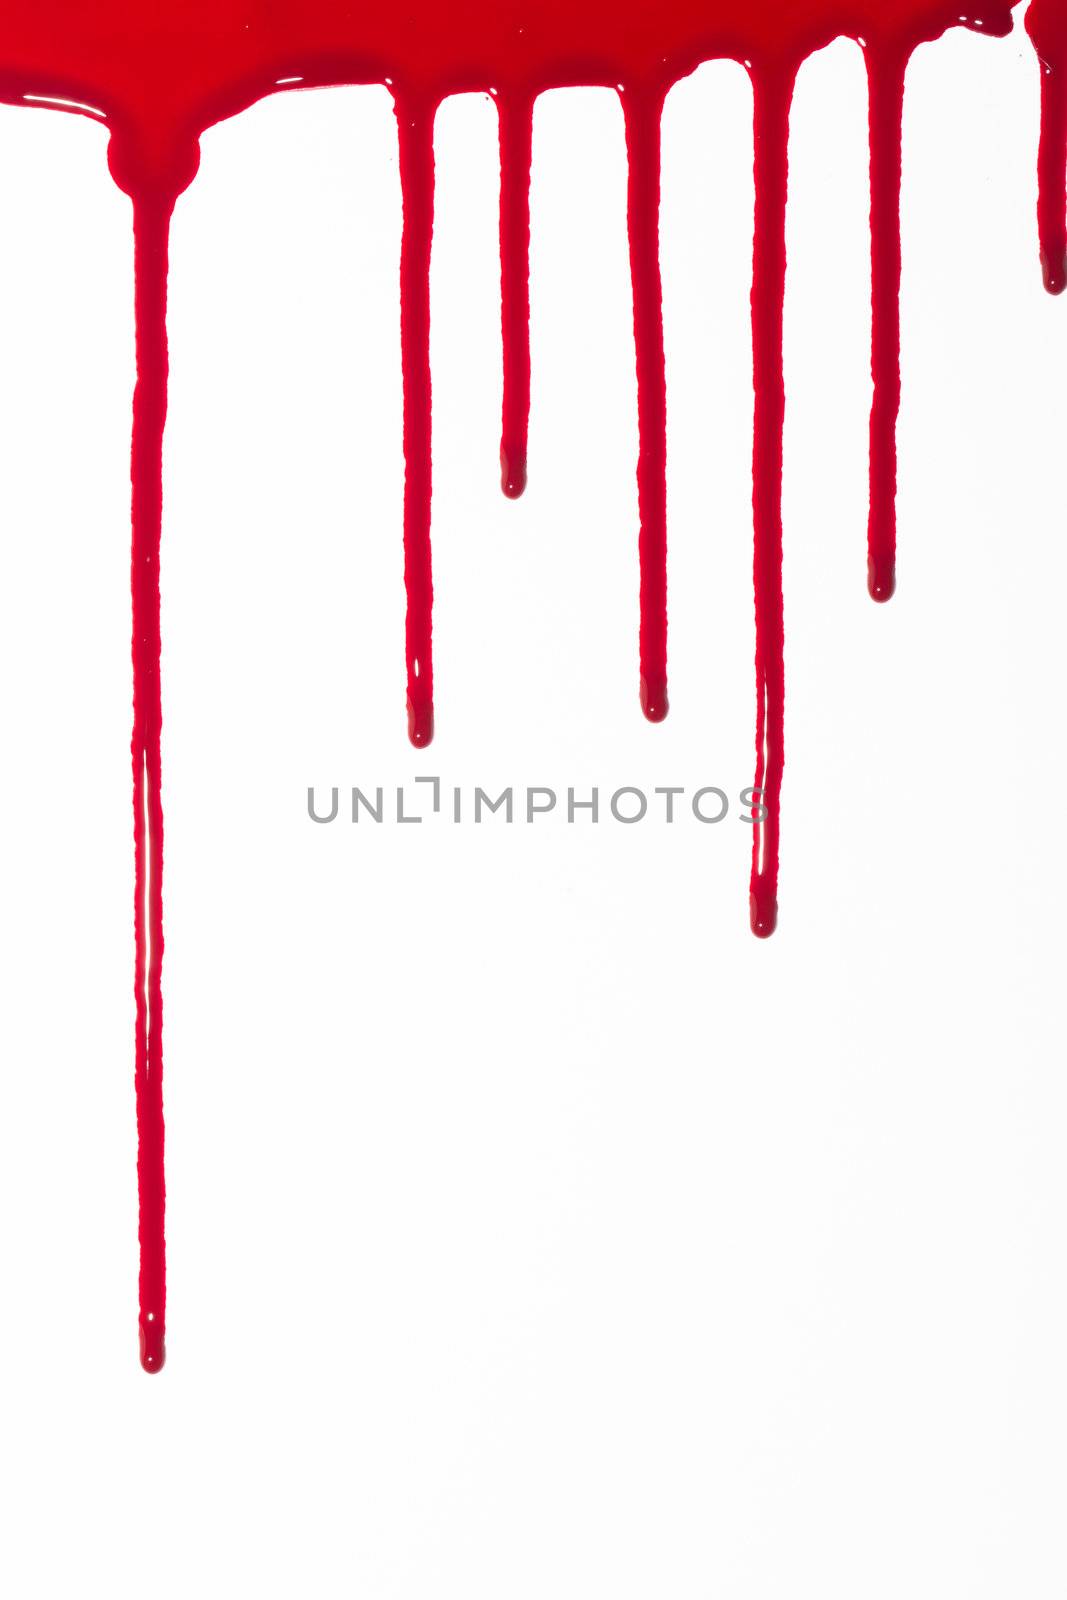 A high resolution image of a blood drips and drops